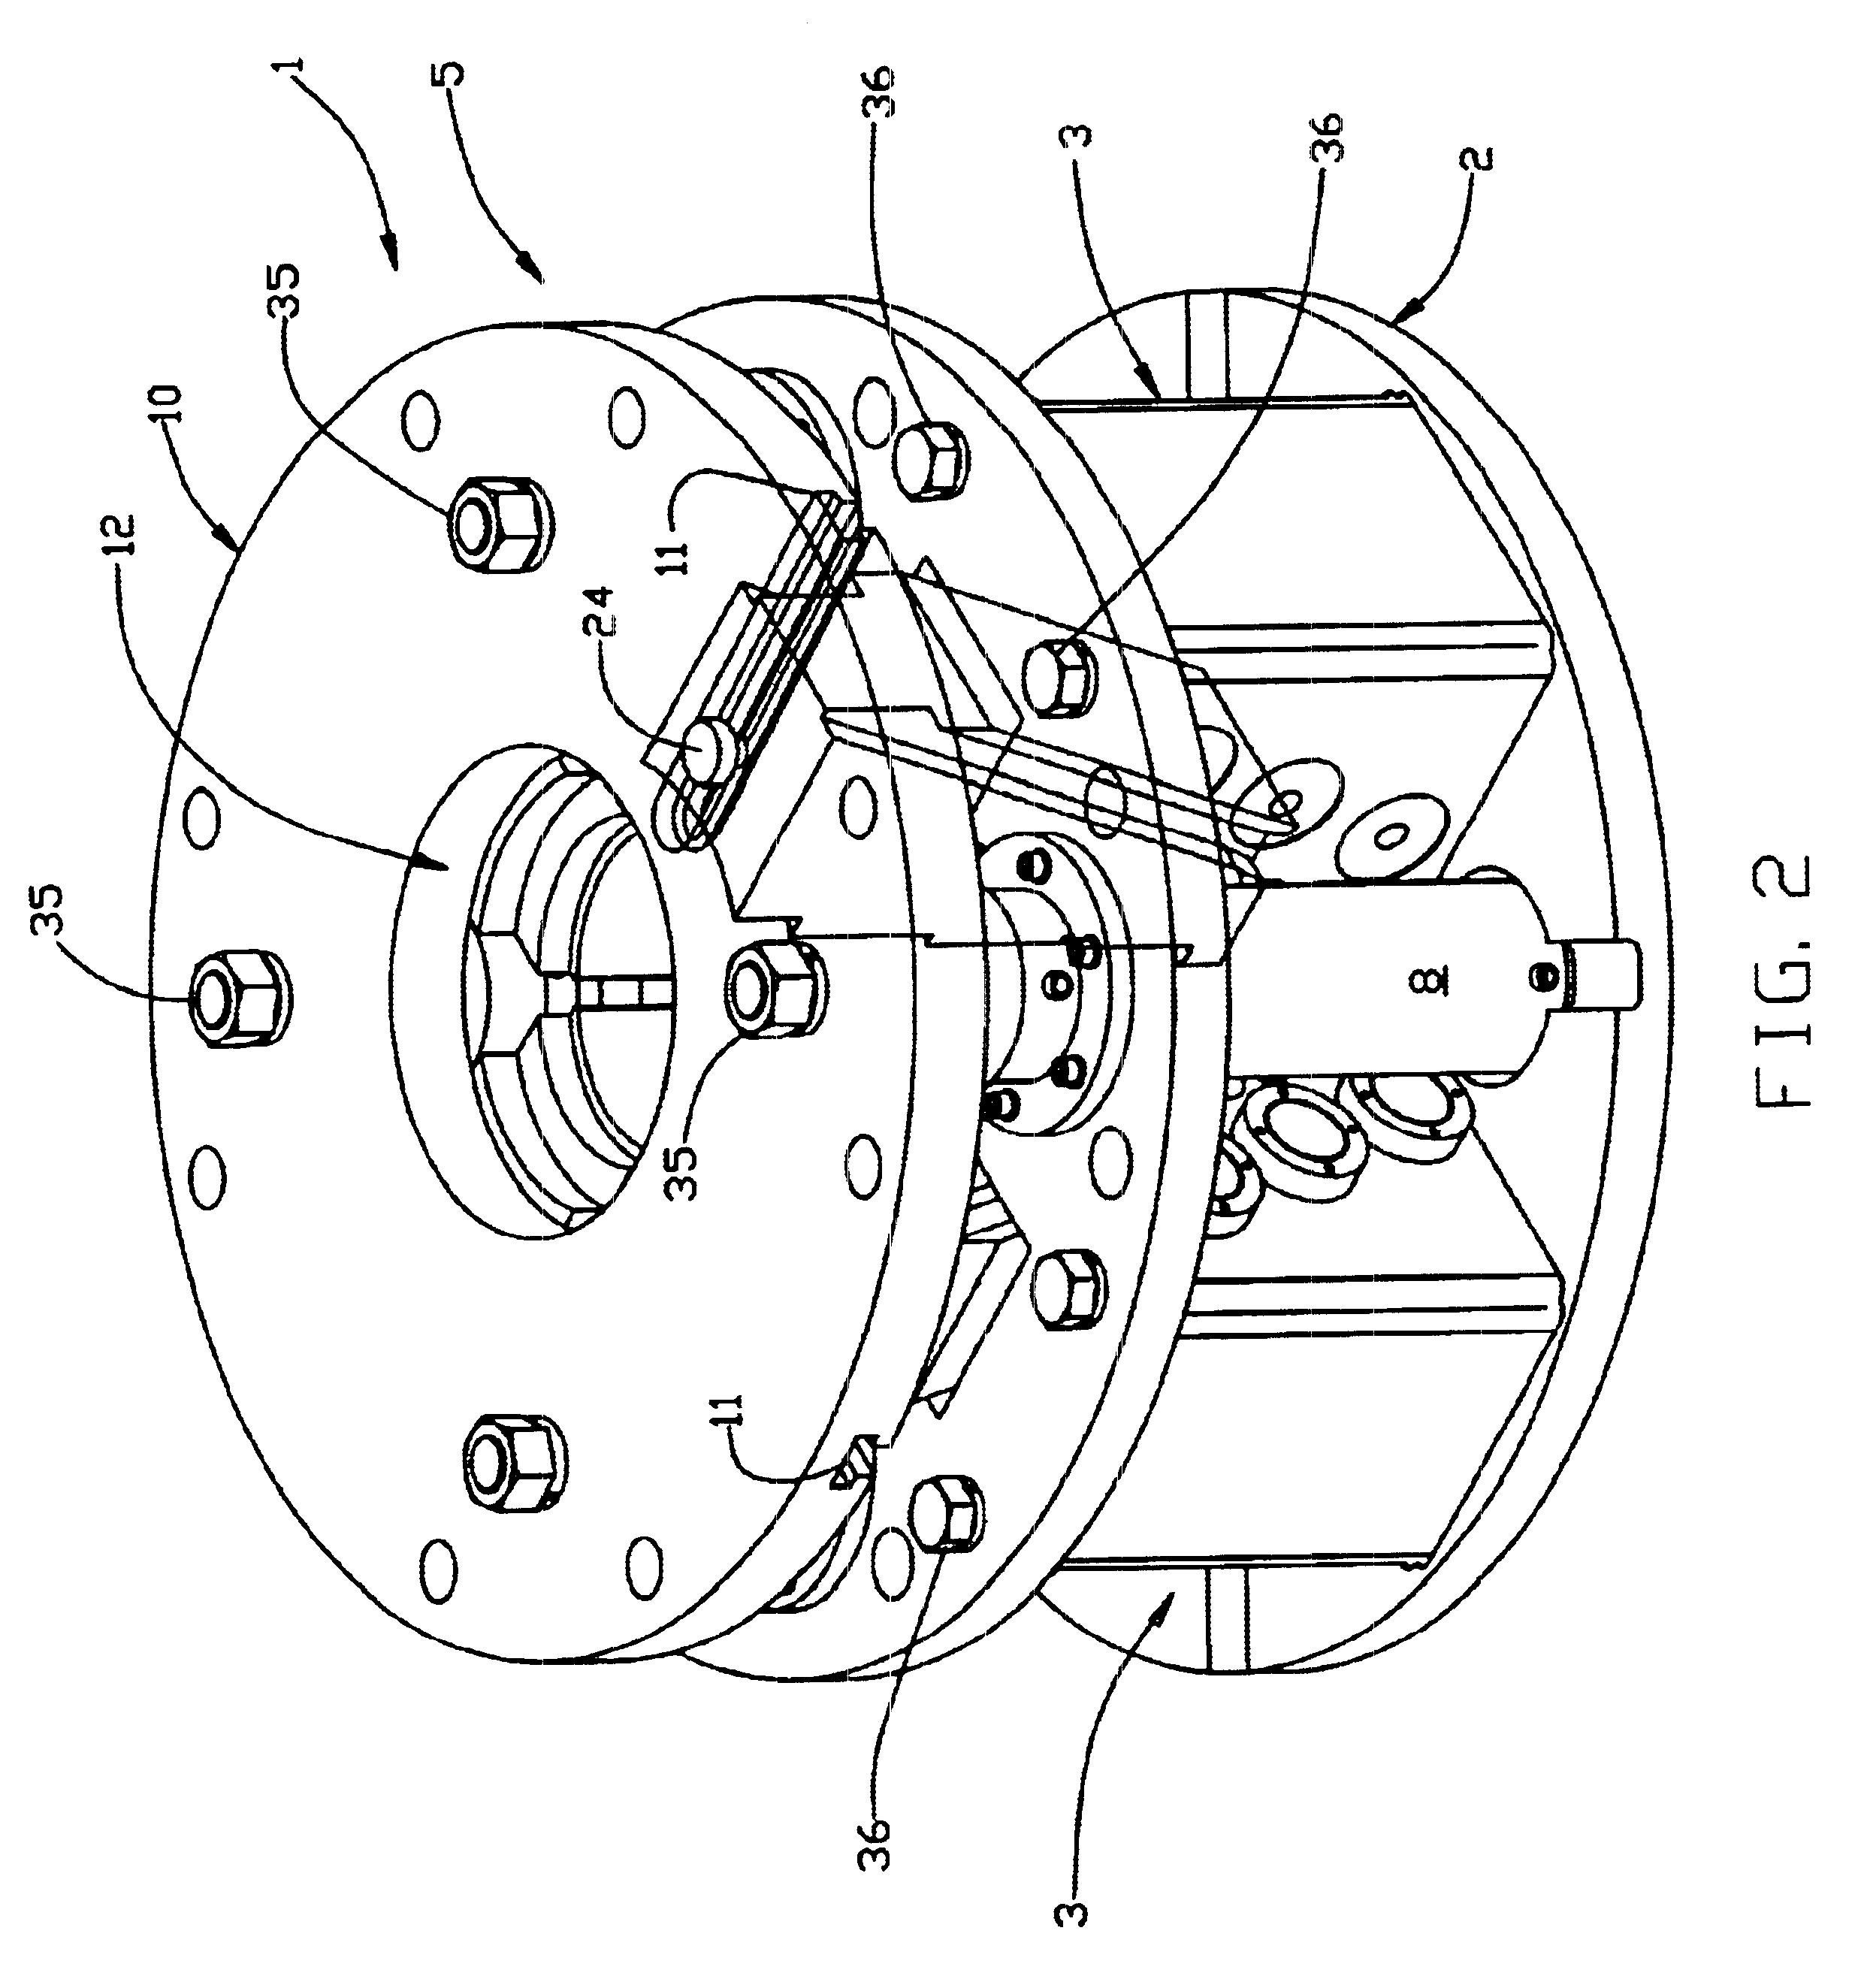 Snubbing unit with improved slip assembly